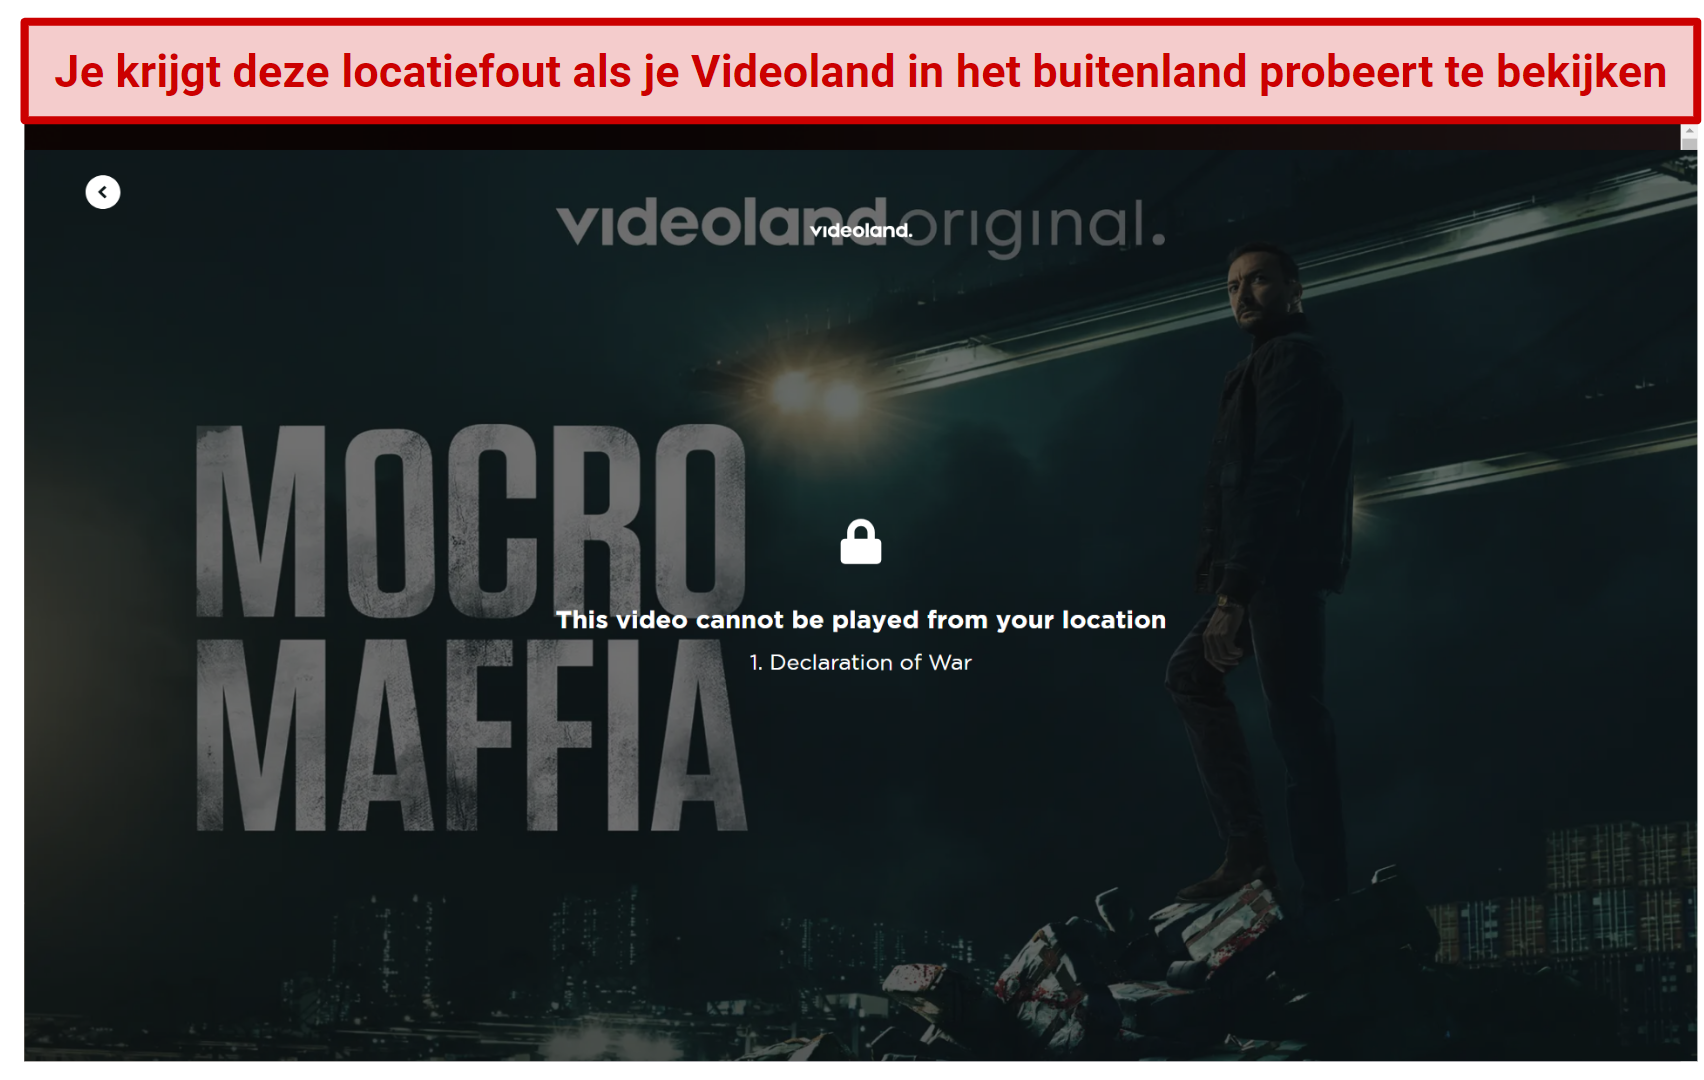 A screenshot of Videoland's location error message when you try to watch its content outside the Netherlands